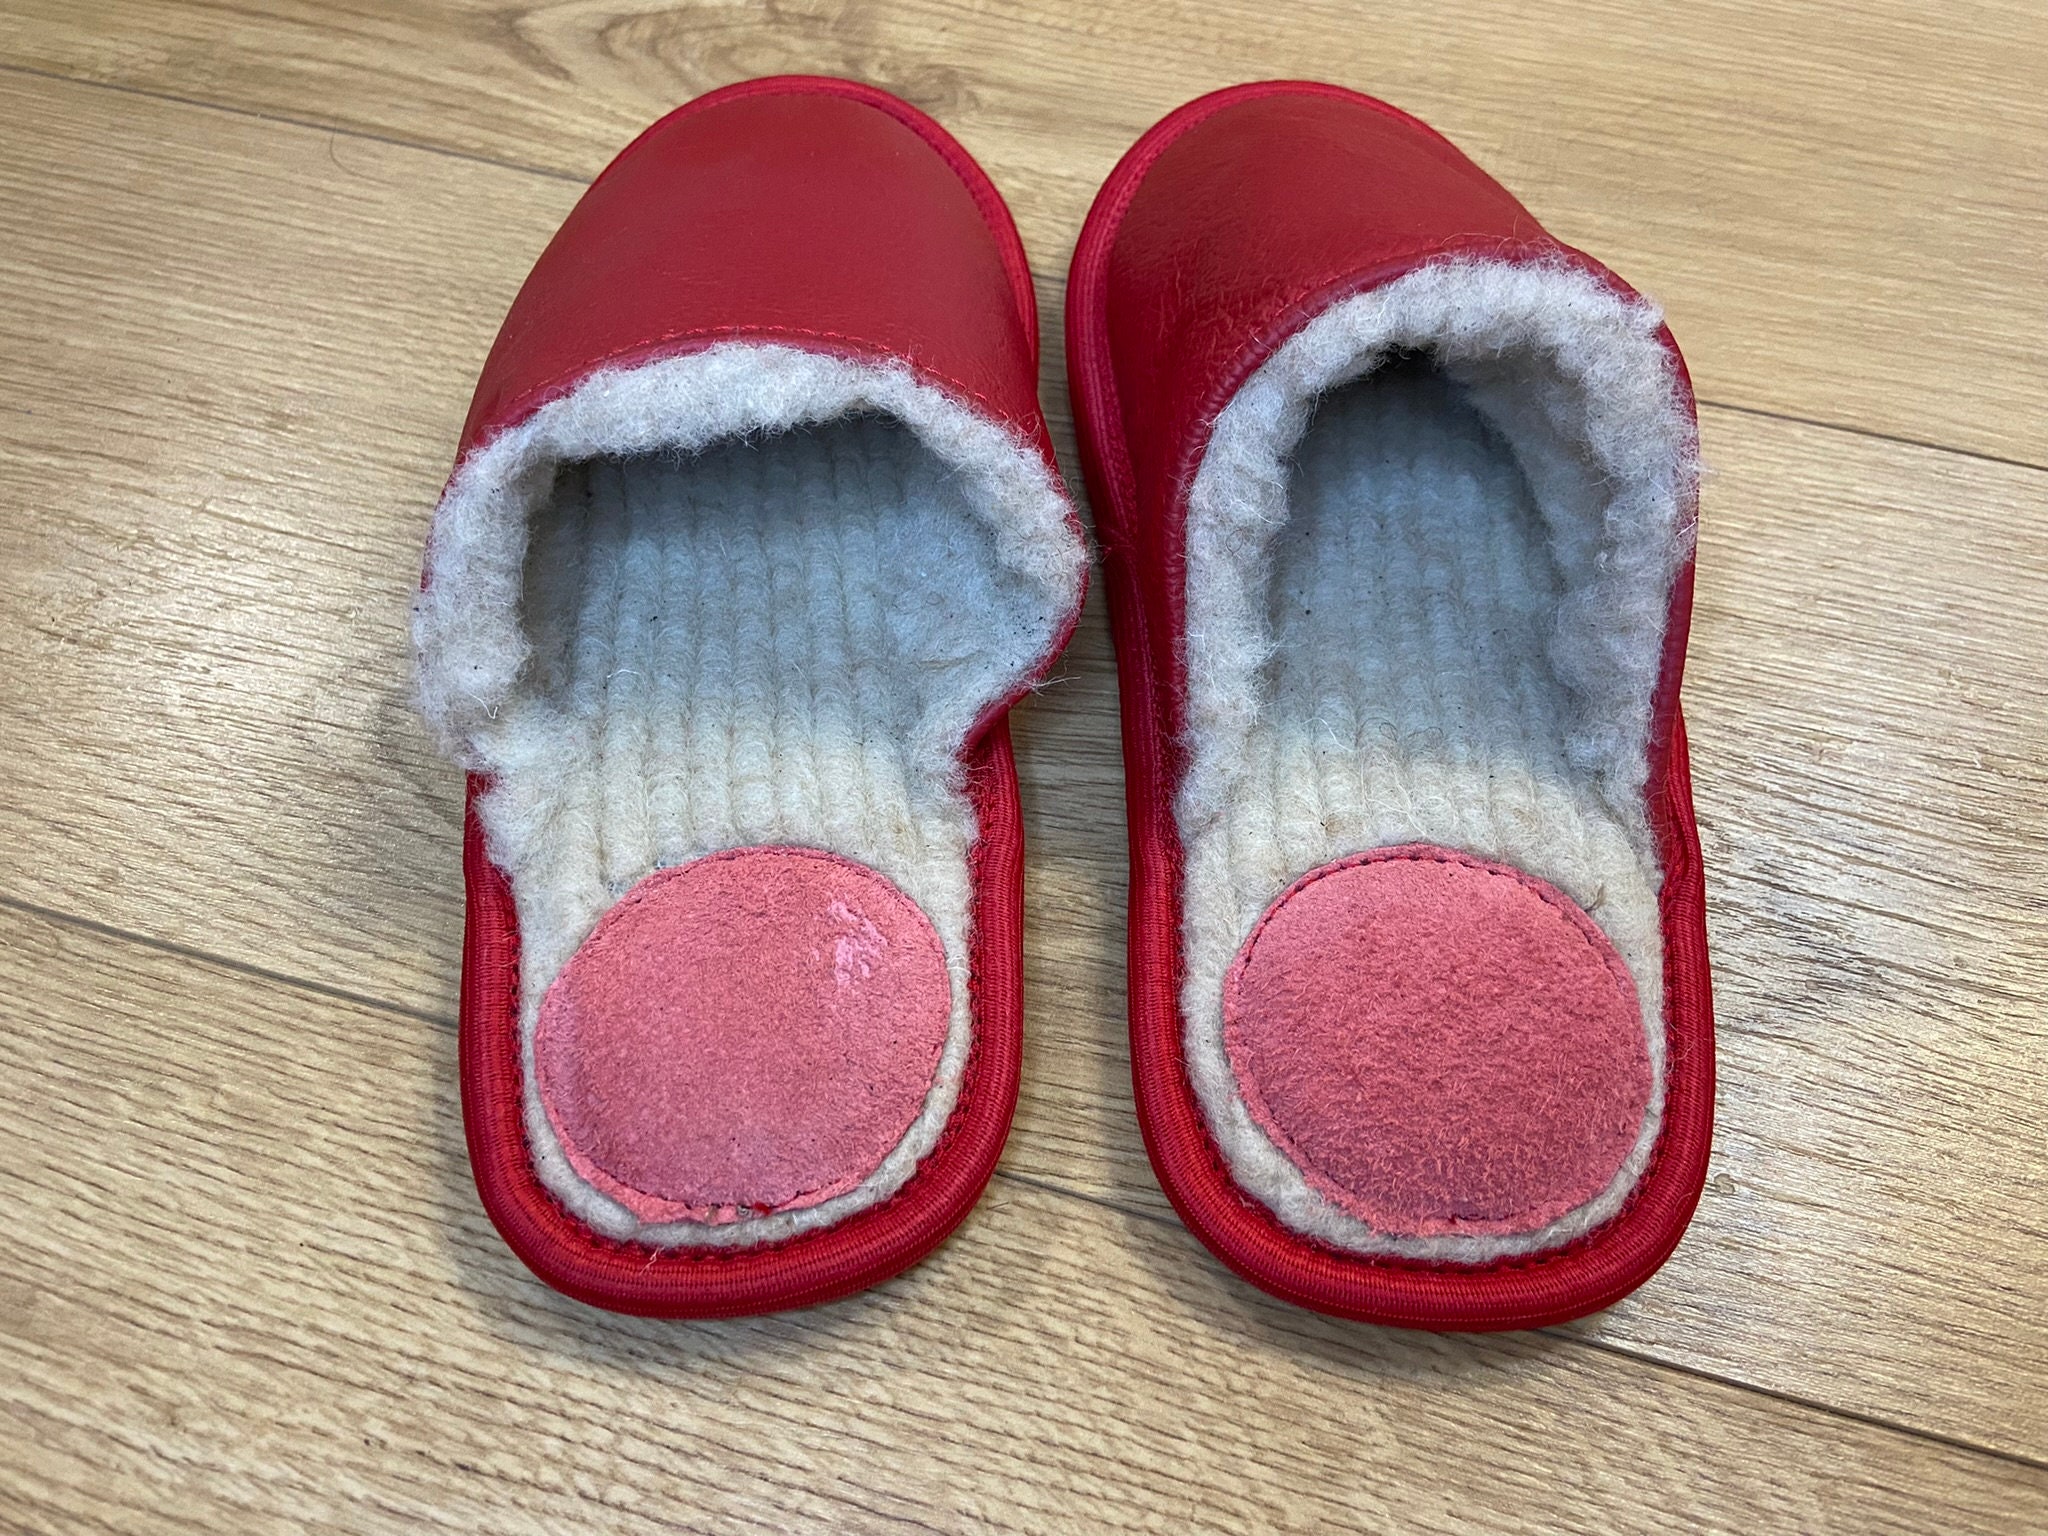 Women Slippers Red Slippers Leather Slippers Wool Slippers - Etsy